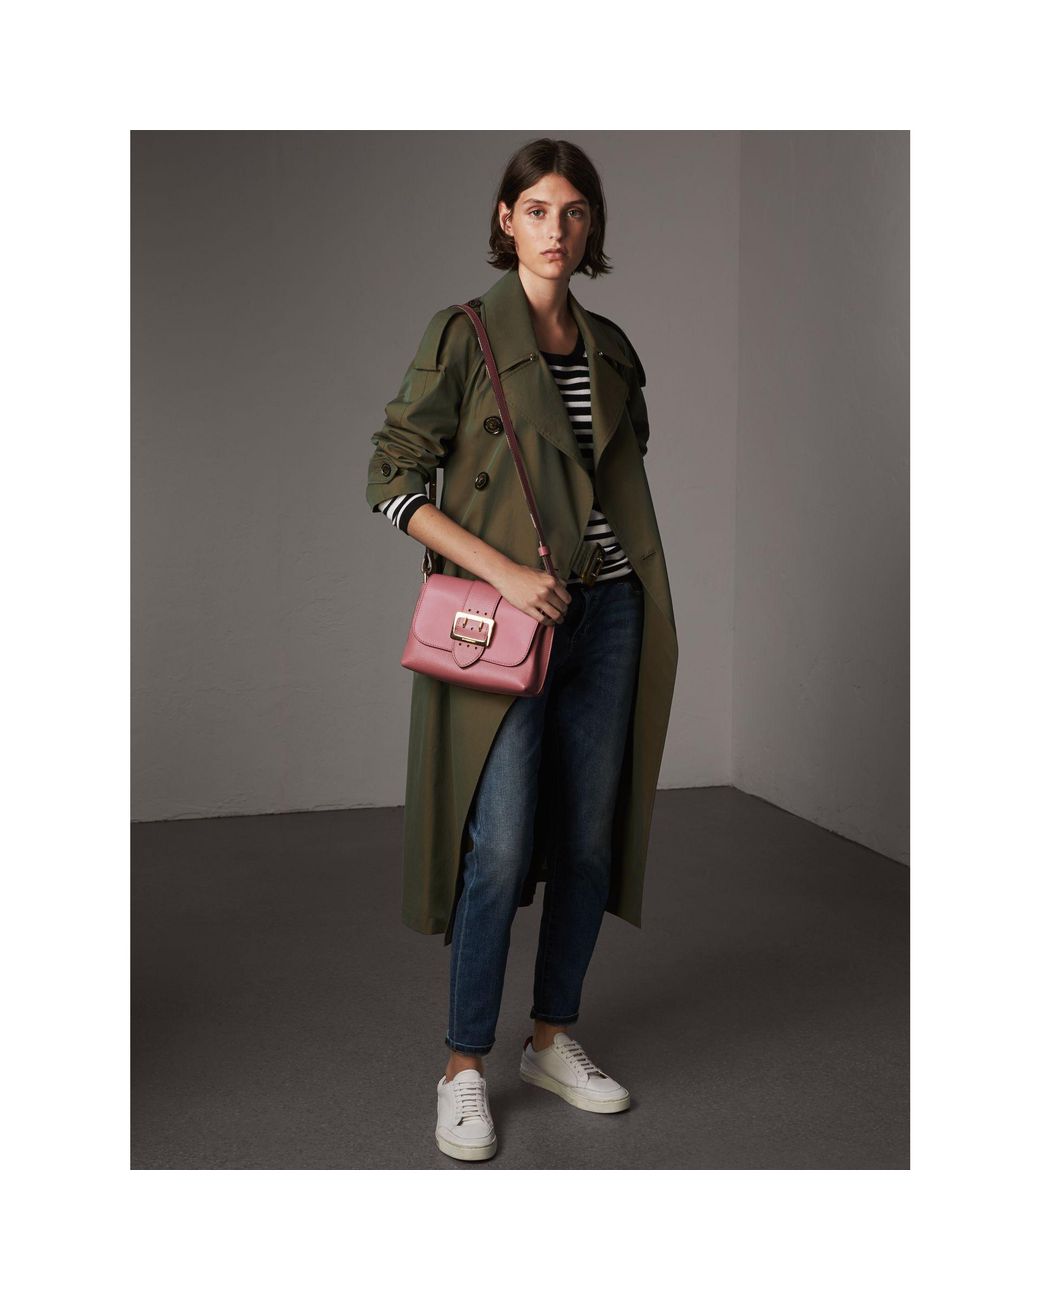 Burberry The Buckle Crossbody Bag In Leather Dusty Pink | Lyst